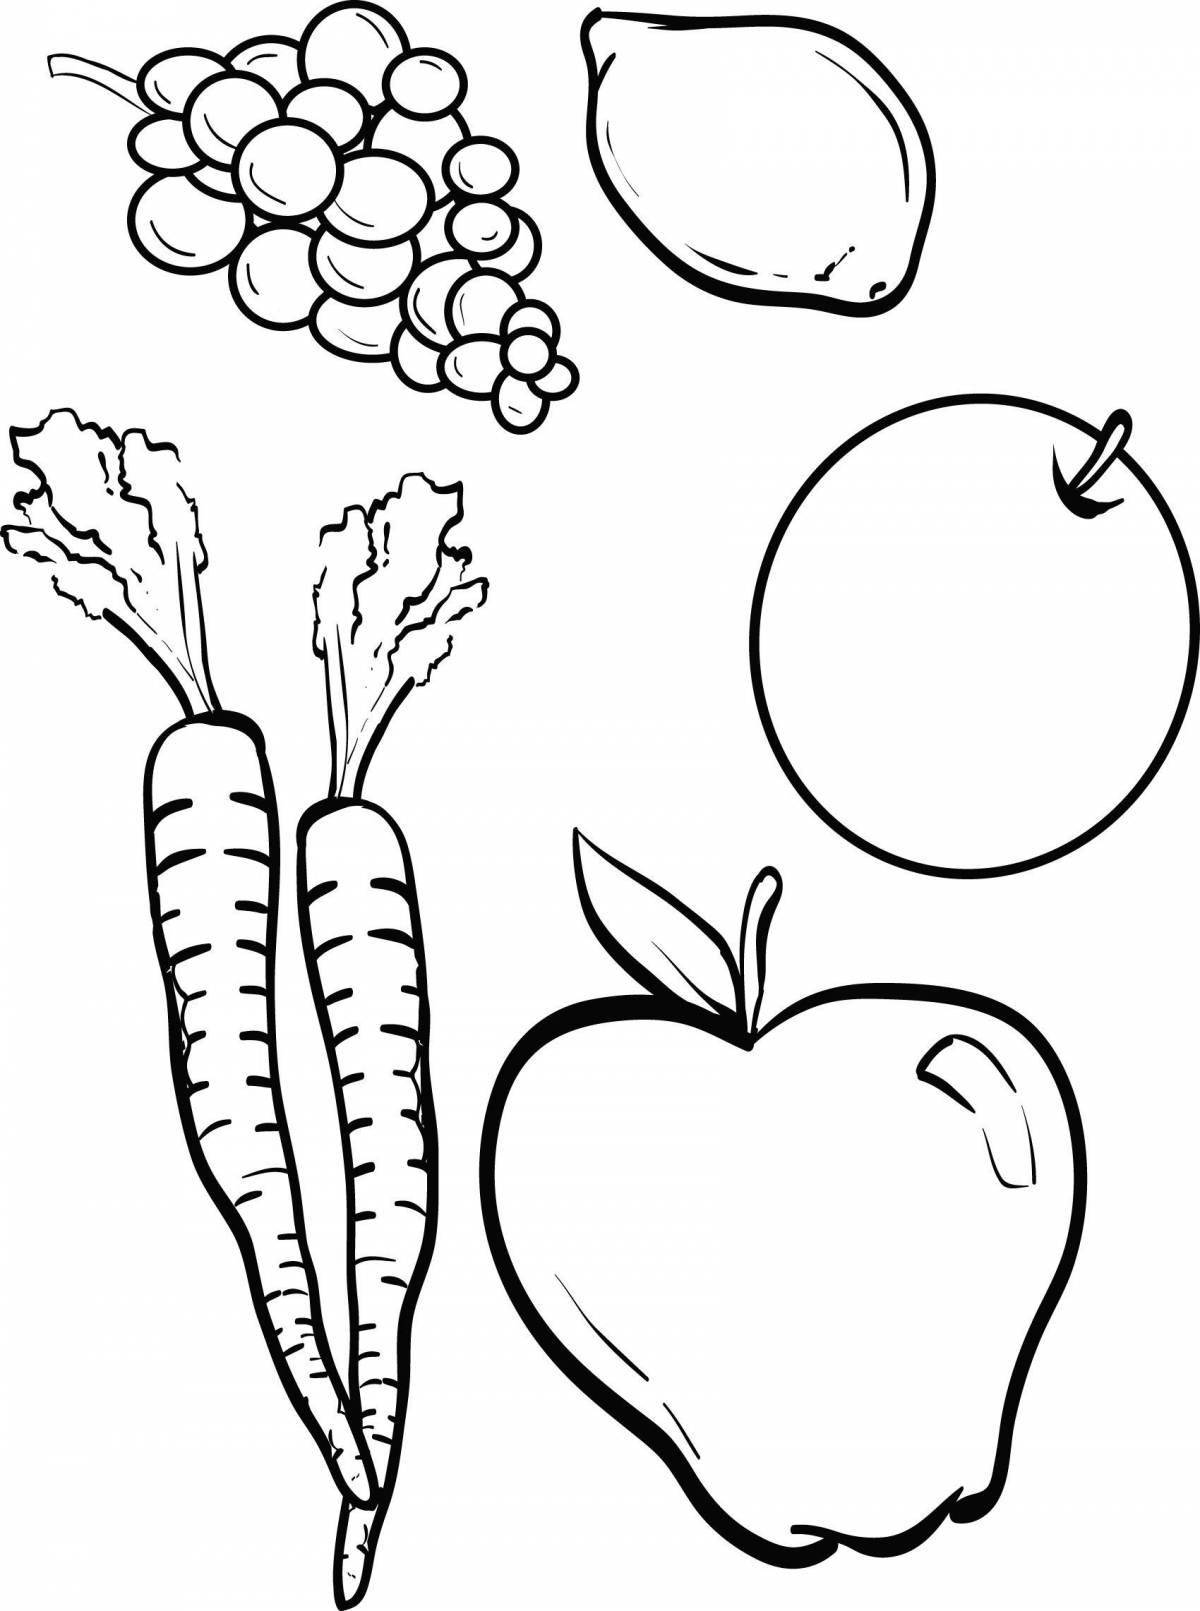 Bright vegetable coloring book for kids